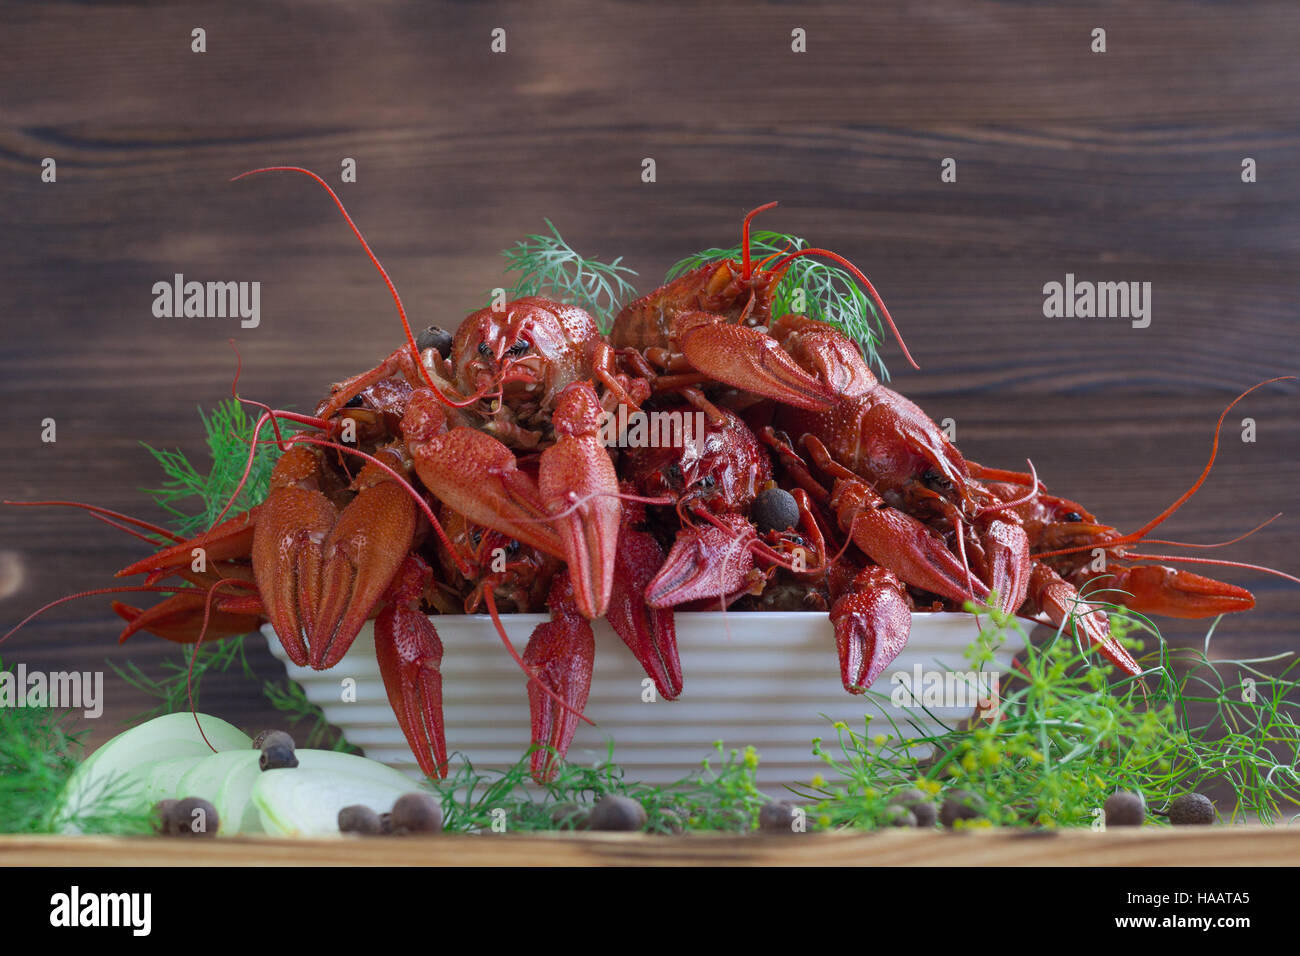 Plate of red boiled crayfishes with claws and fennel, onions and peppers on wooden background Stock Photo